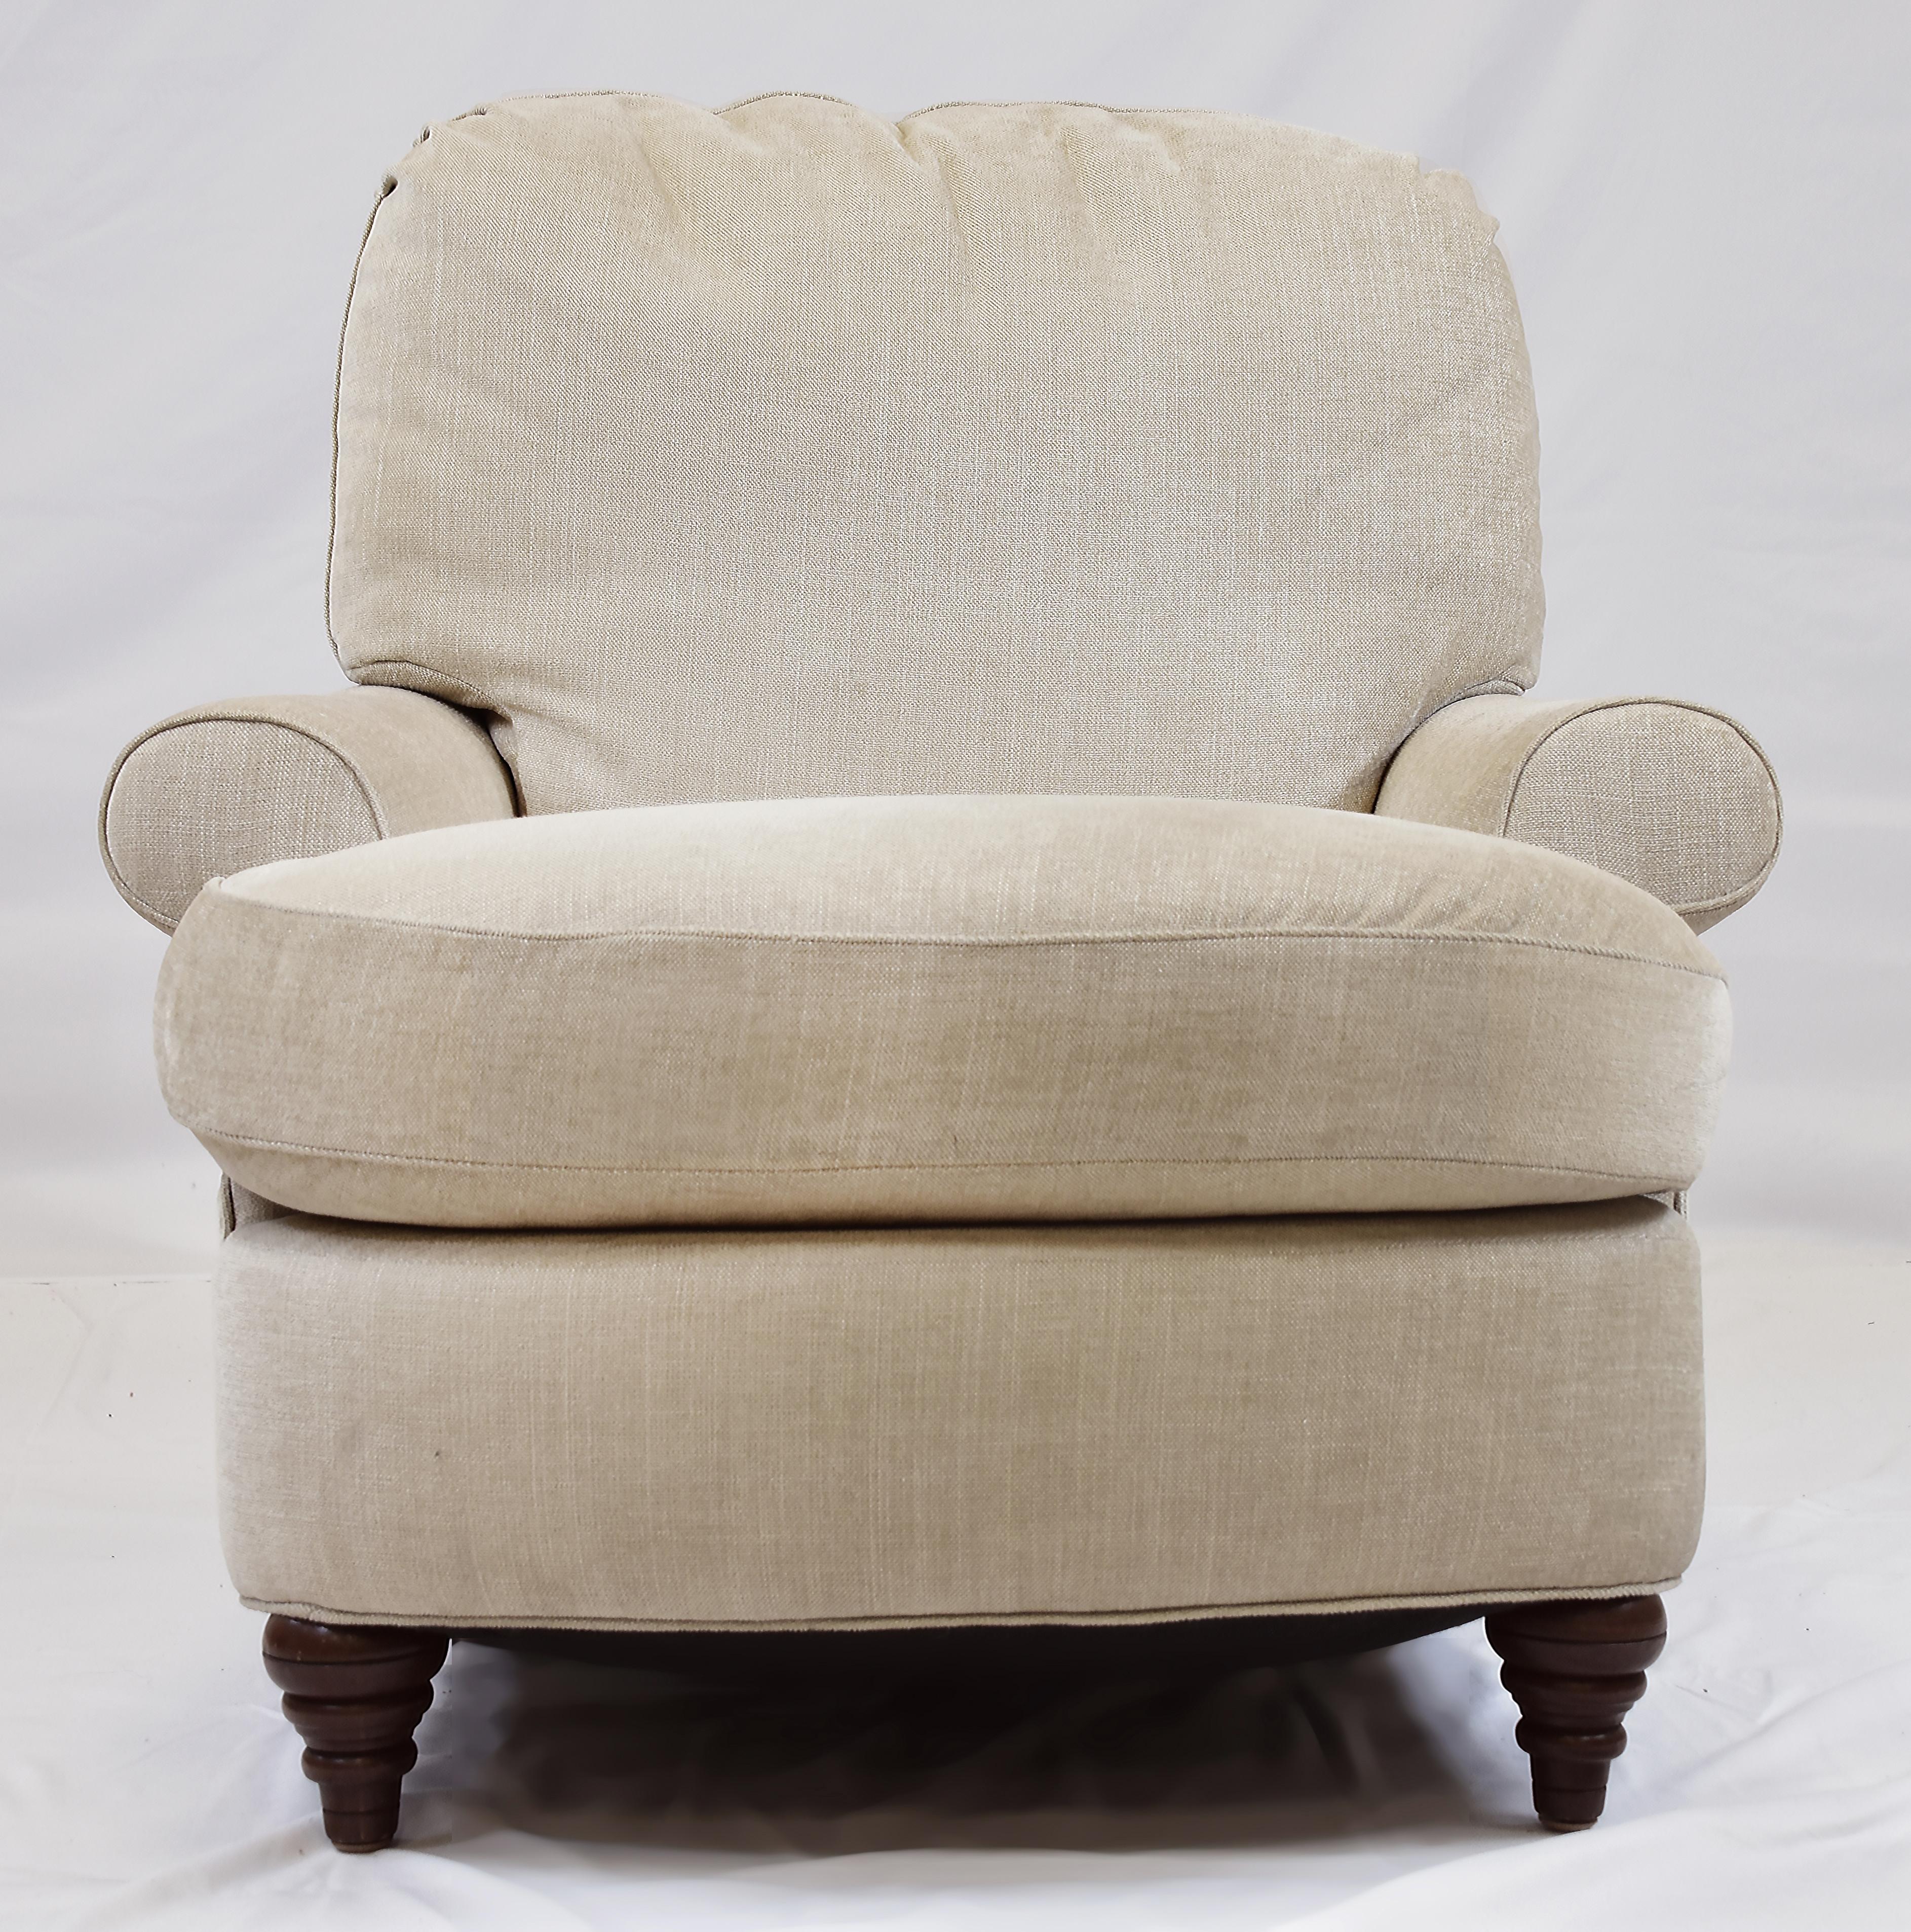 Le Jeune Upholstery Roadster Lounge Chair Showroom Model

Offered for sale is a ROADSTER C2.923 Lounge Chair showroom model.		This chair has a medium overall scale, and was designed for low loungy relaxed seating. You can see its seating pitch